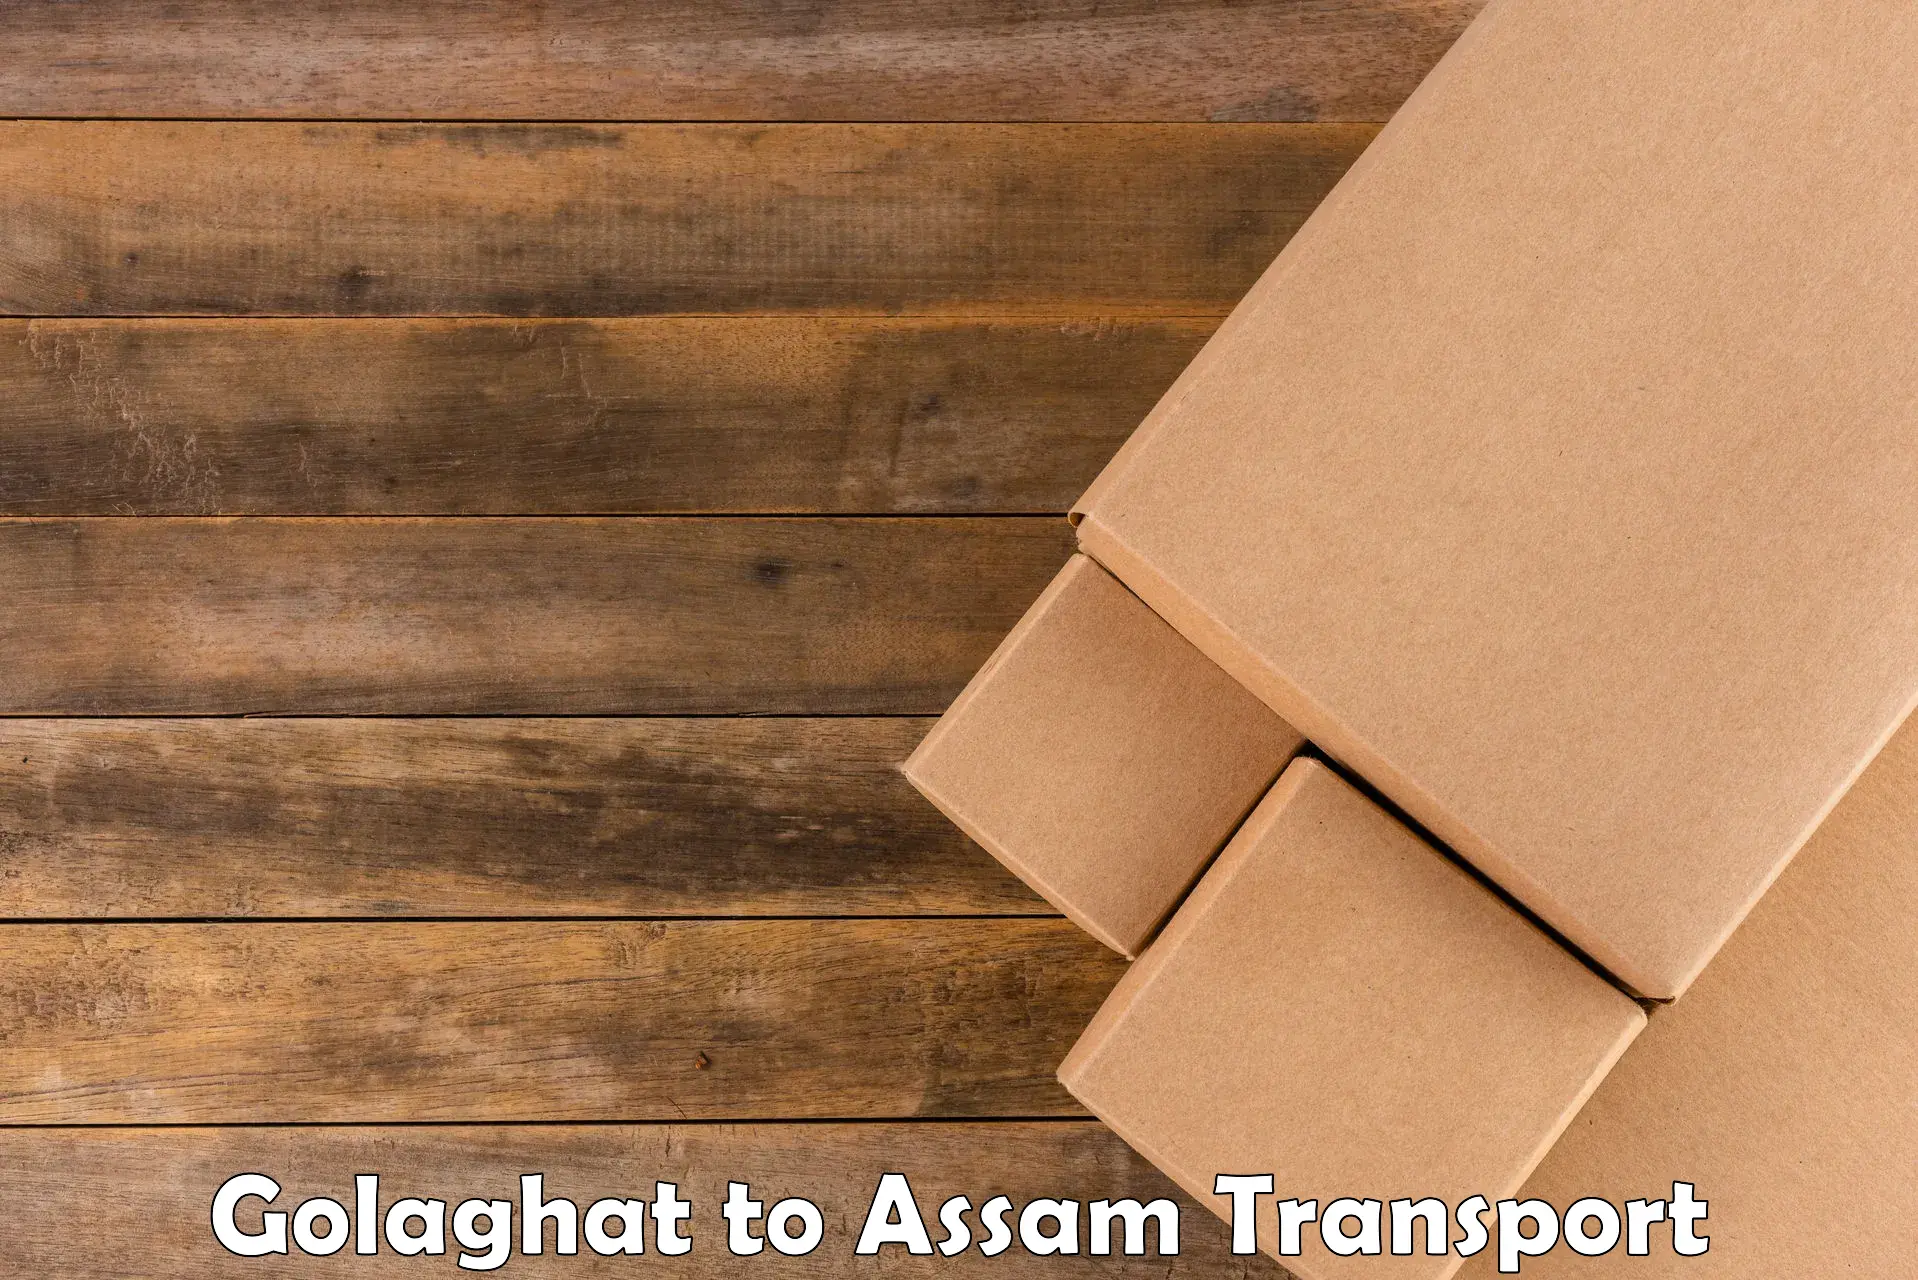 Transport in sharing Golaghat to Golaghat